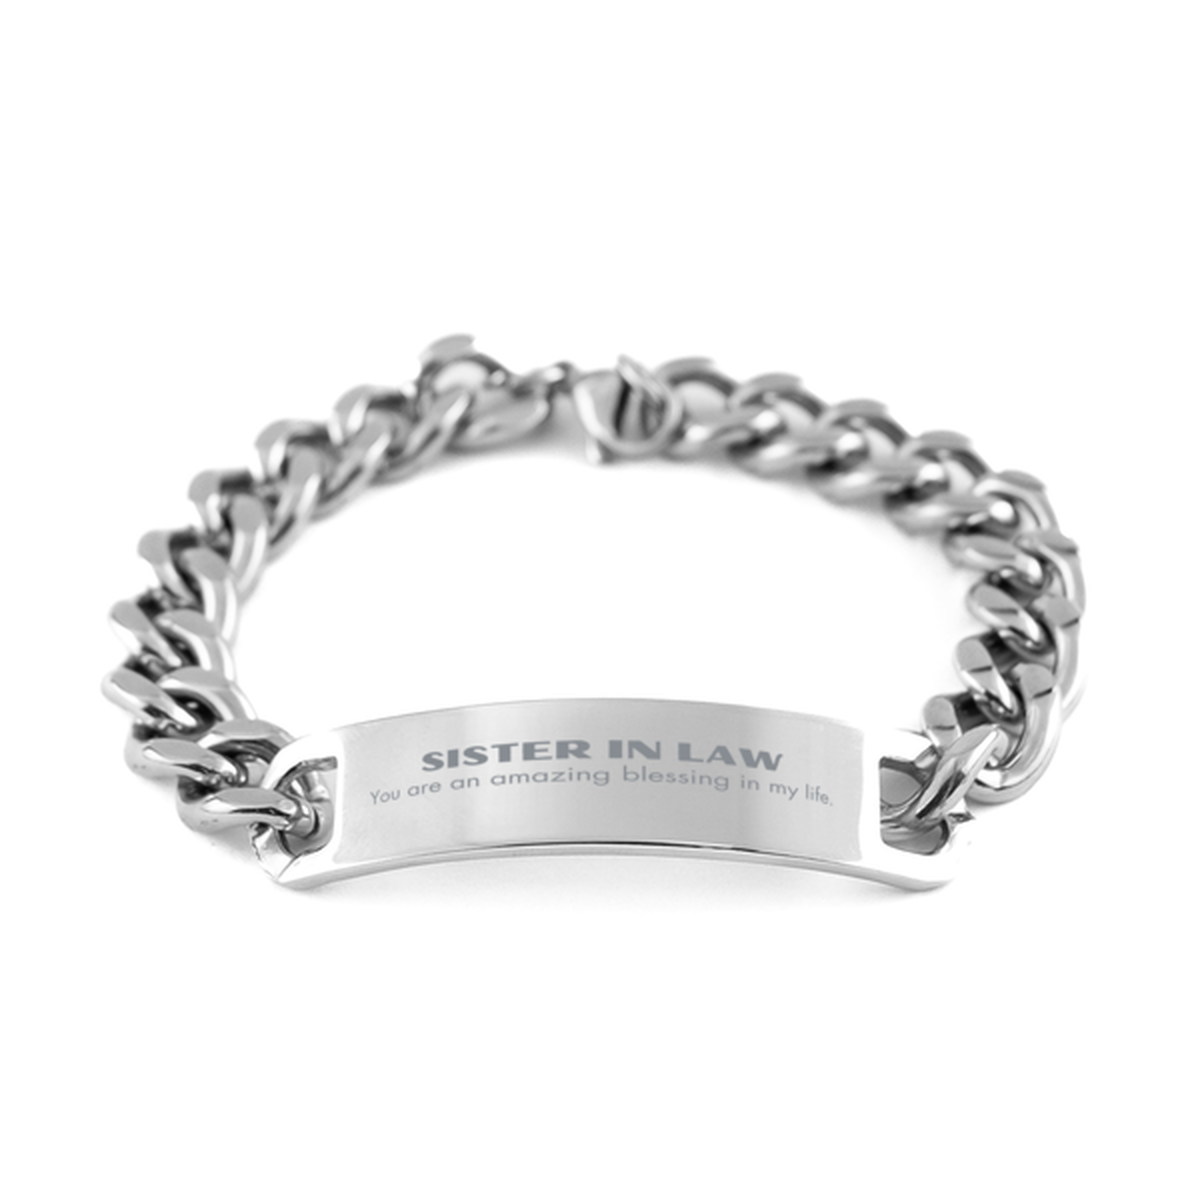 Sister In Law Cuban Chain Stainless Steel Bracelet, You are an amazing blessing in my life, Thank You Gifts For Sister In Law, Inspirational Birthday Christmas Unique Gifts For Sister In Law